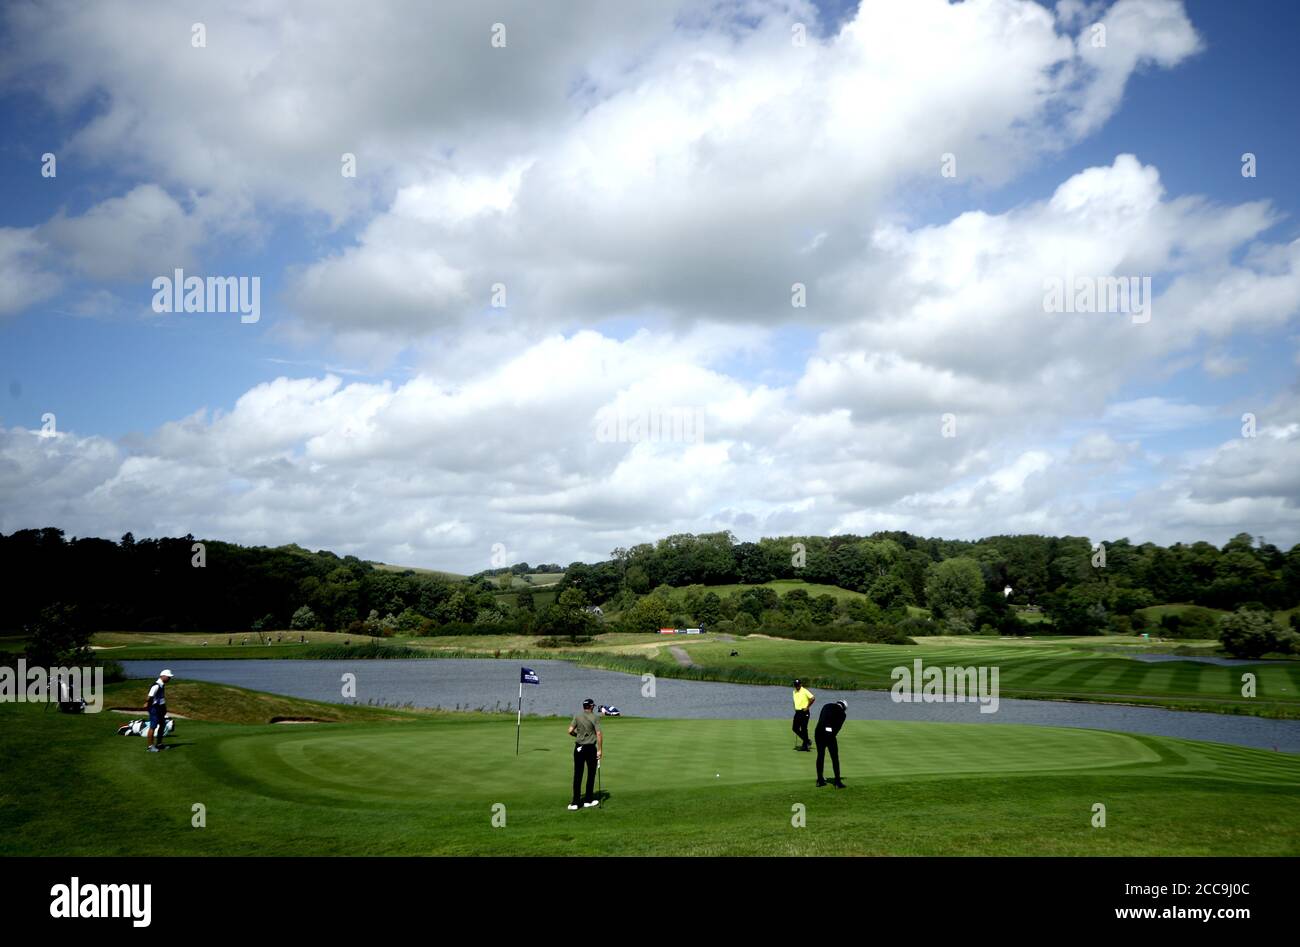 England's Aaron Rai (right) putts on the 12th during day one of the ISPS Handa Wales Open at Celtic Manor Resort. Stock Photo